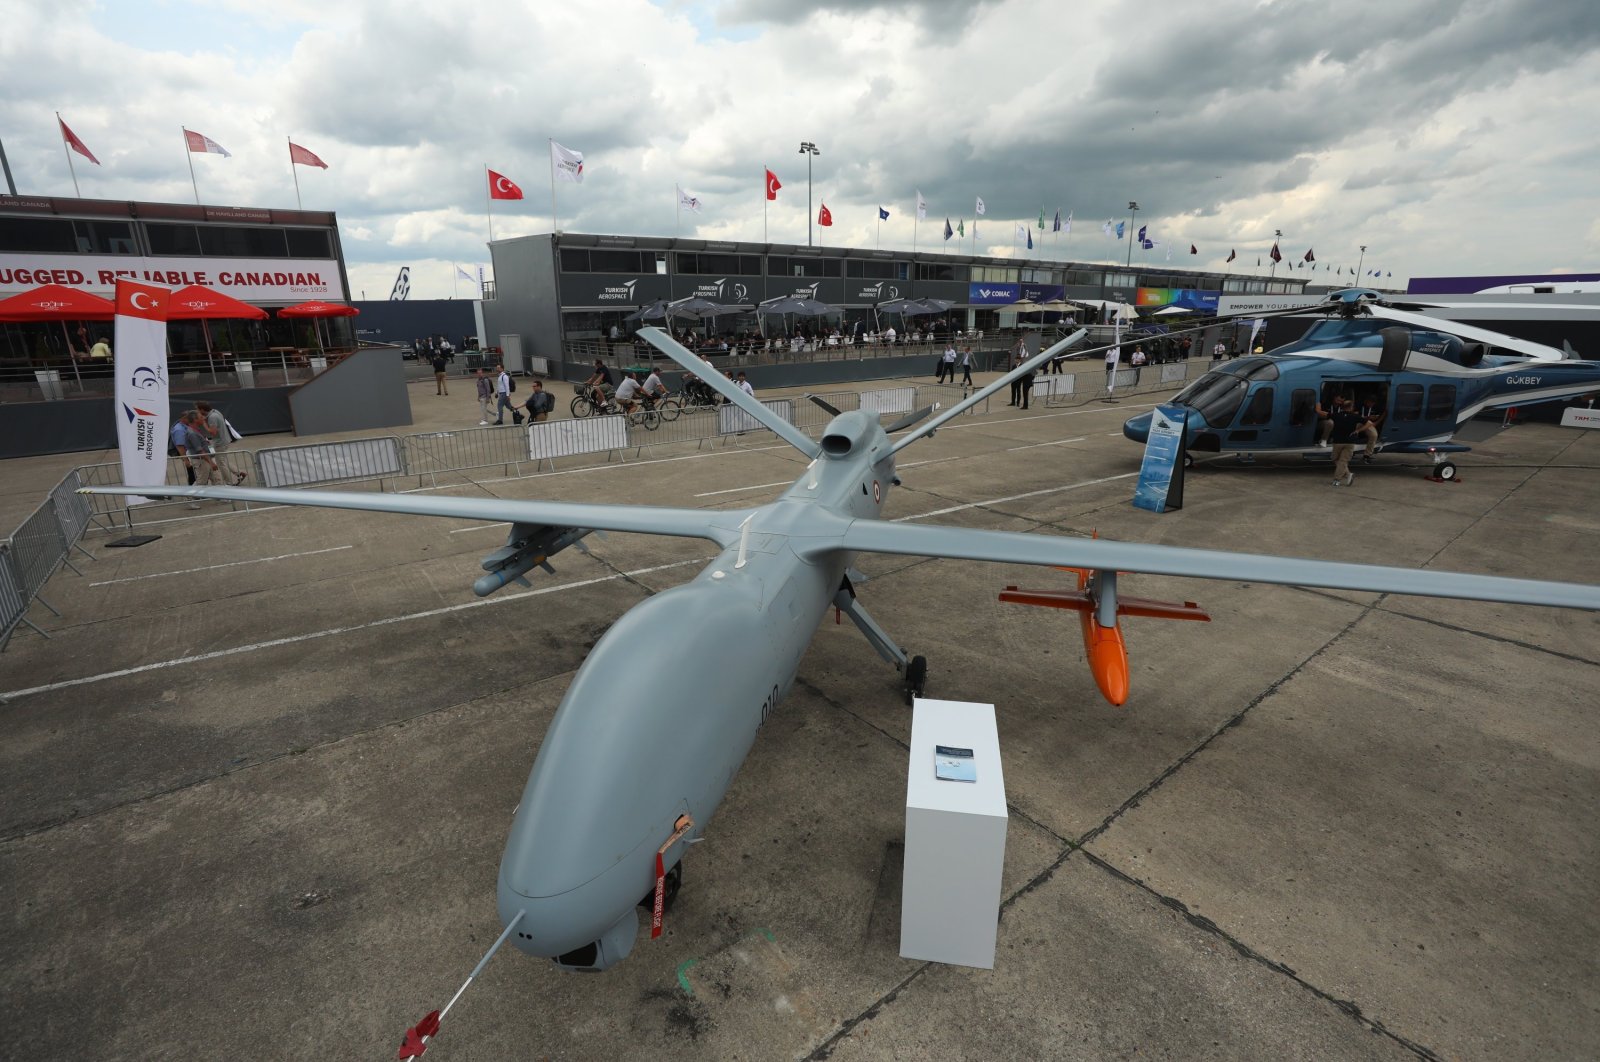 The Anka, a combat drone developed by Turkish Aerospace Industries (TAI), is displayed during the Paris Air Show, in Le Bourget, north of Paris, France, June 20, 2023. (AA Photo)